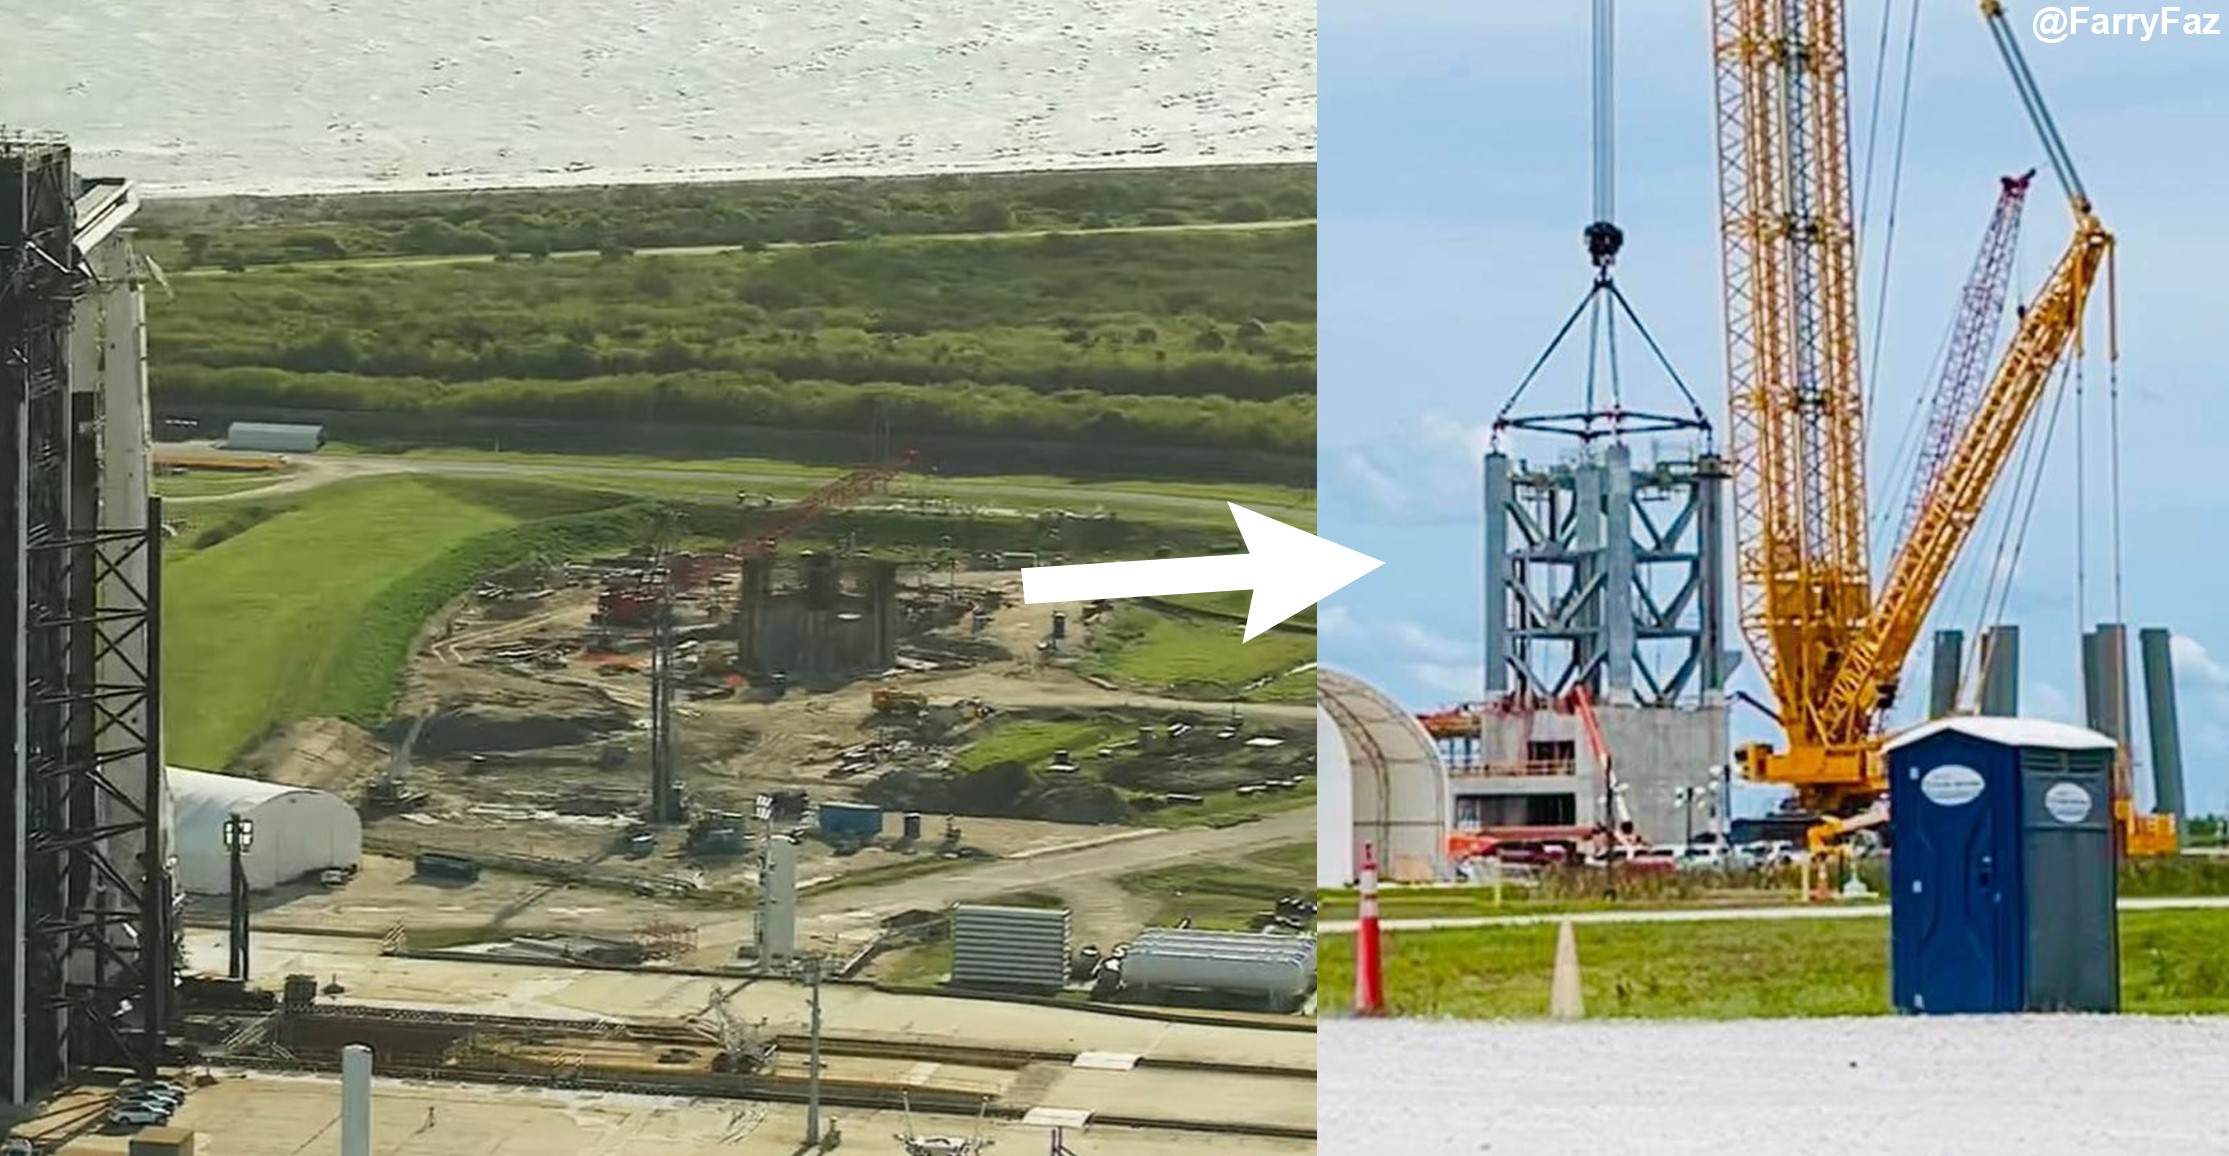 Starship 39A launch tower first stack 062122 (@FarryFaz) April to June 1